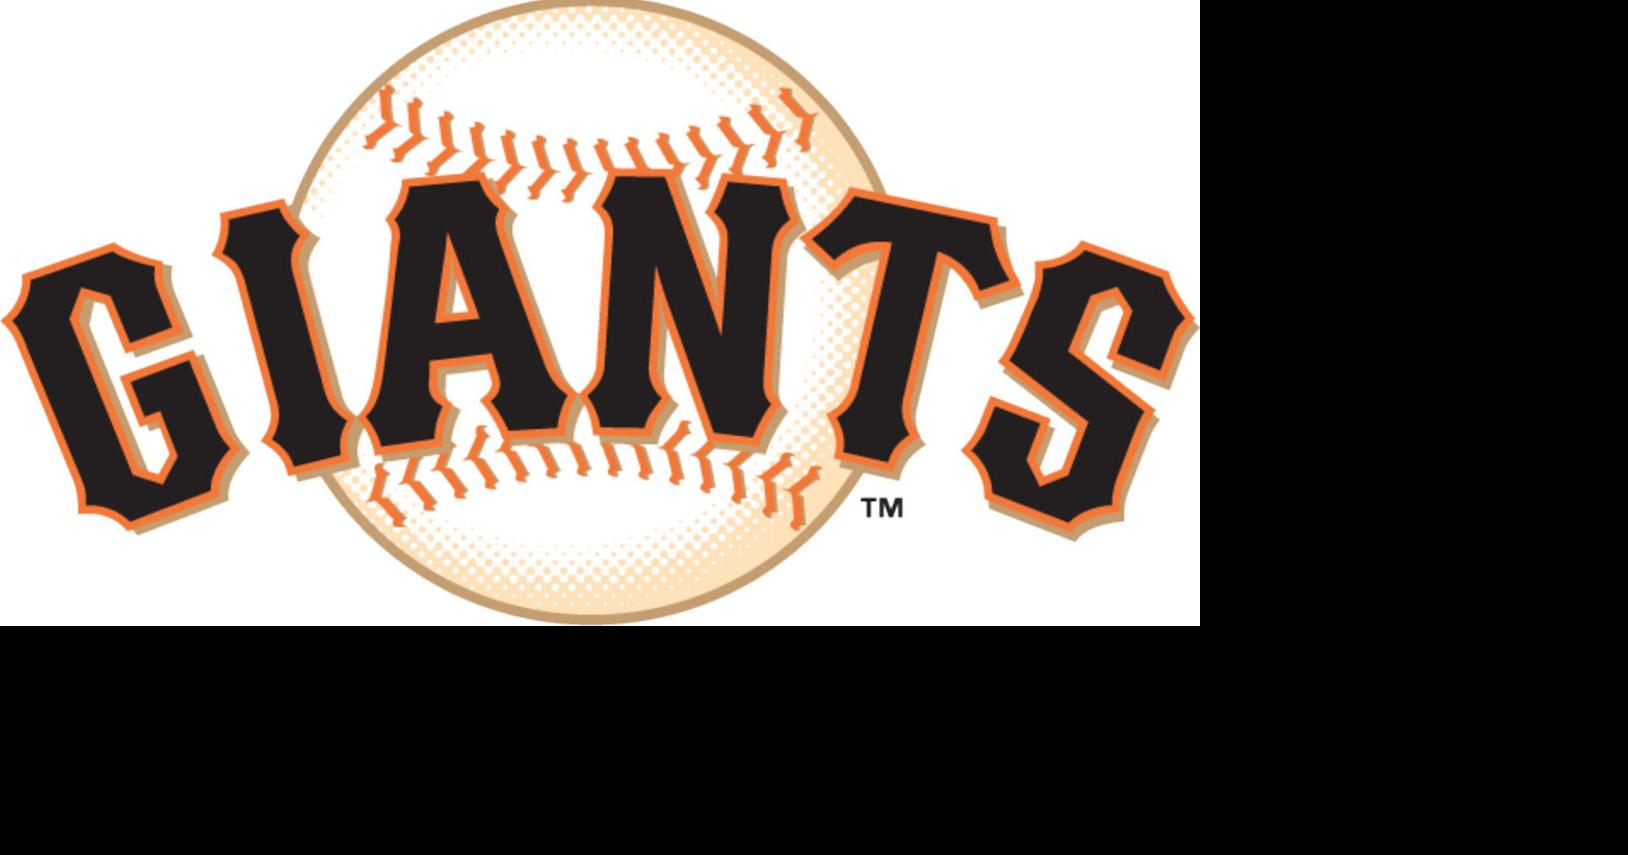 Giants-Rockies postponed by weather; doubleheader set for Saturday - The  San Diego Union-Tribune